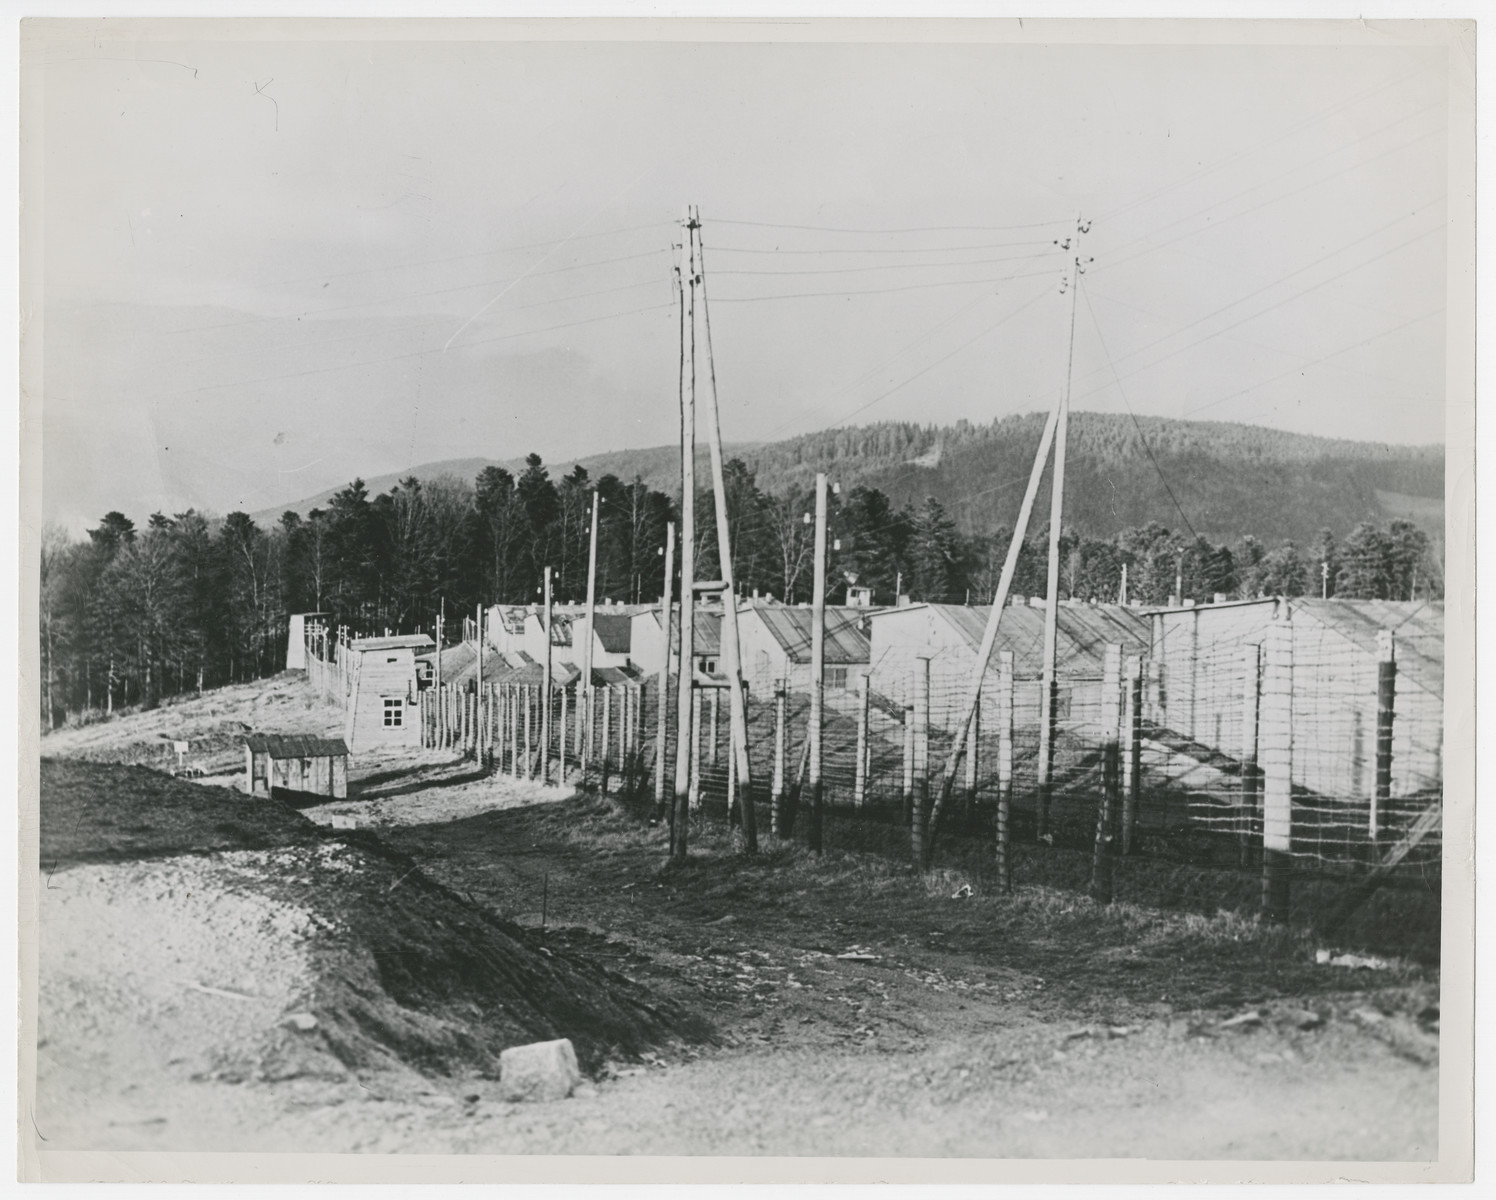 A view of the Struthof concentration camp in Echirmeck, France.

Original caption reads:  "This is a view of the Struthof concentration camp in the Echirmeck area of France.  Barbed wire fencing encloses the crude buildings where 8,000 French patriots are reported to have been gassed by the Germas and then cremated in huge ovens".